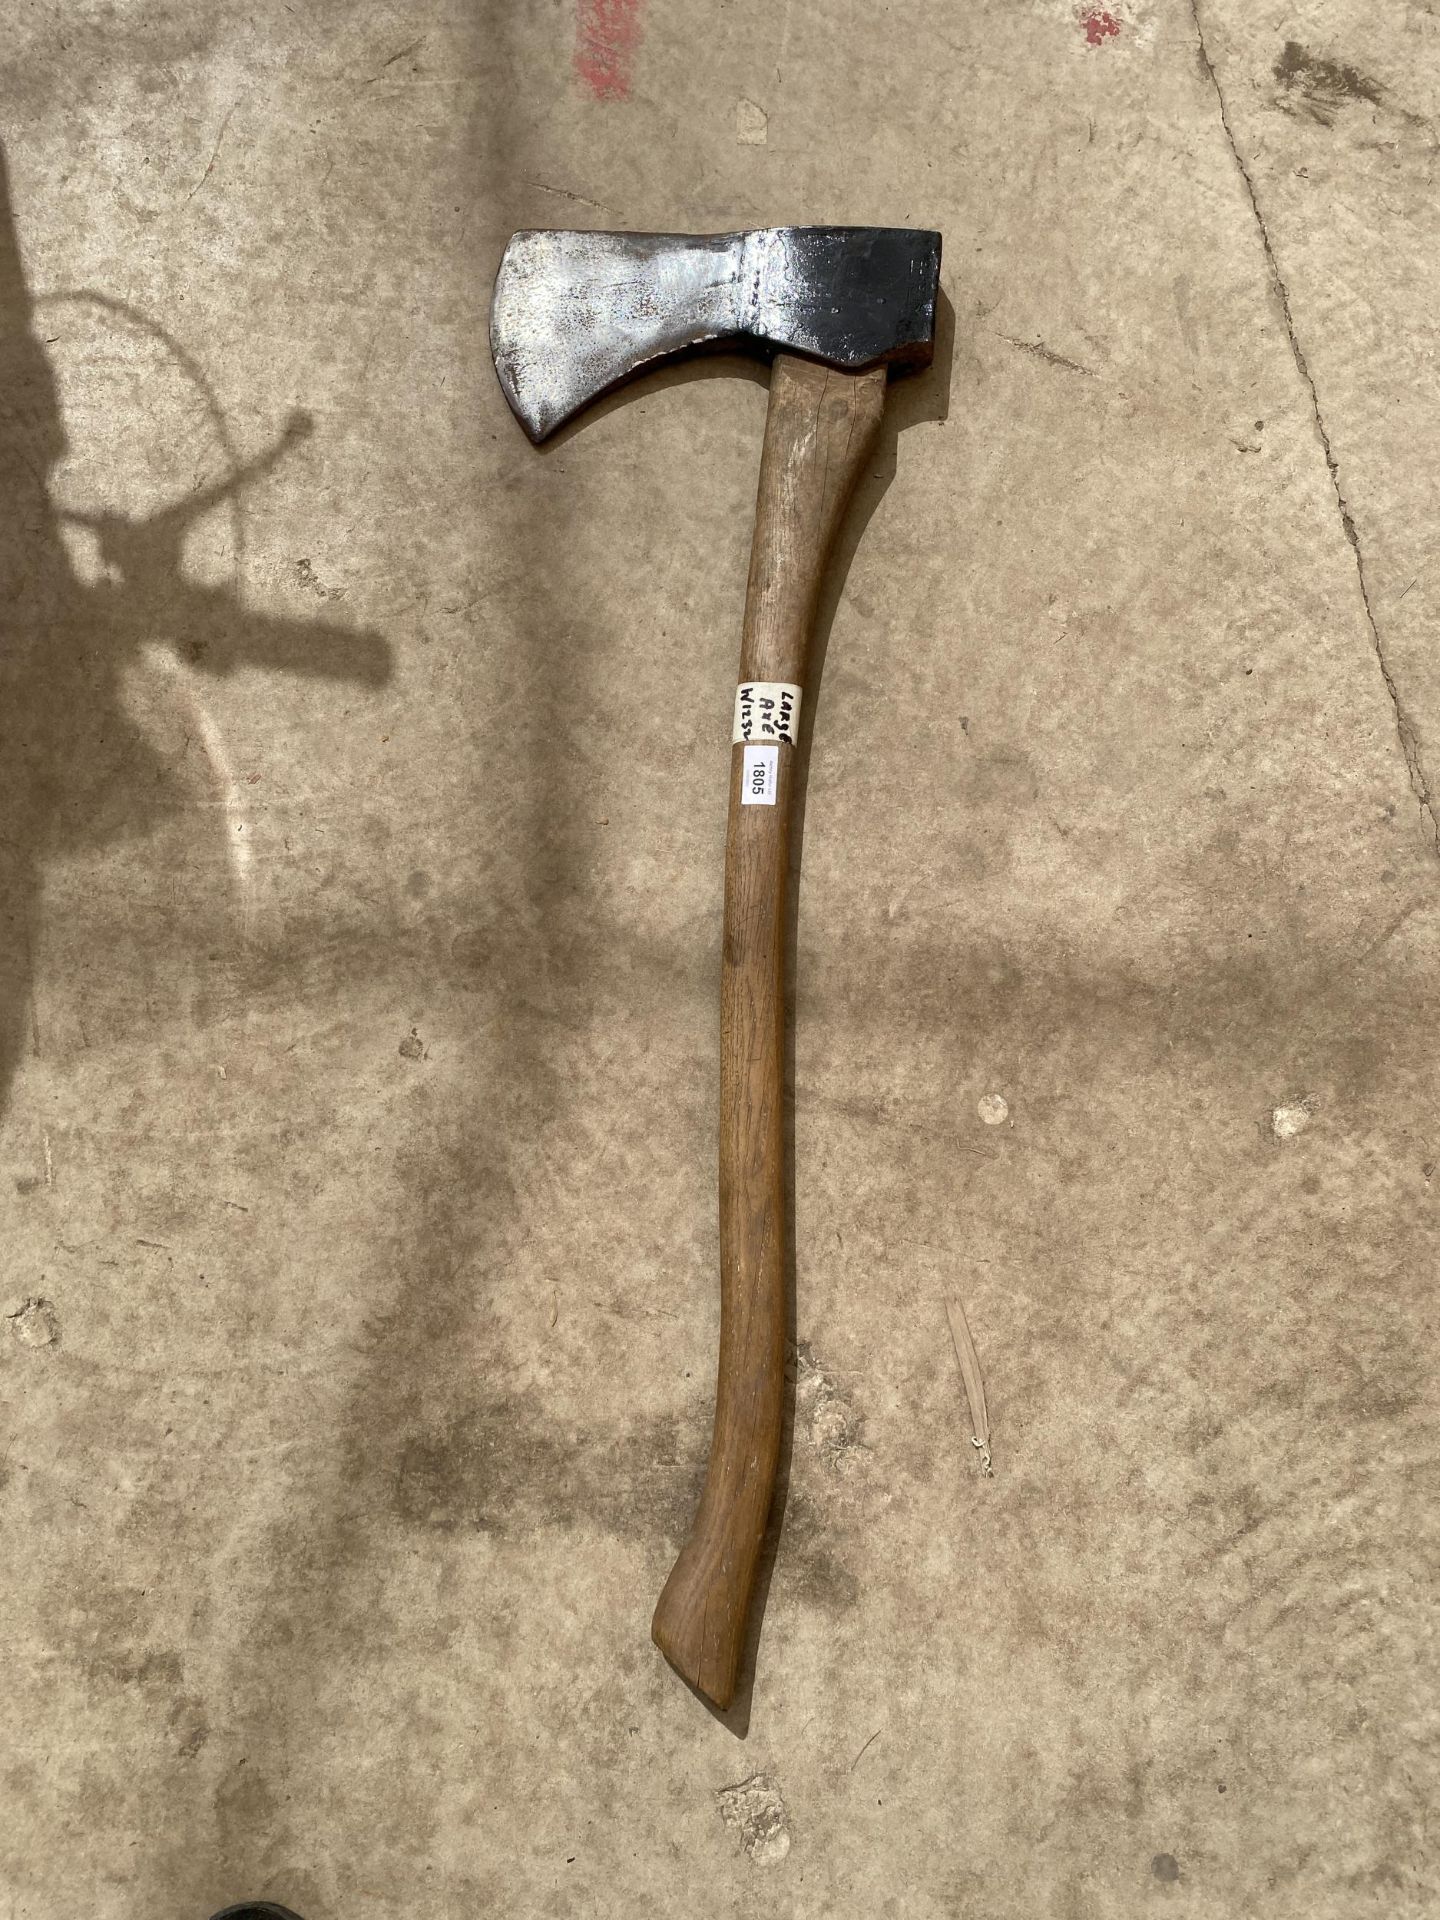 A LARGE VINTAGE AXE